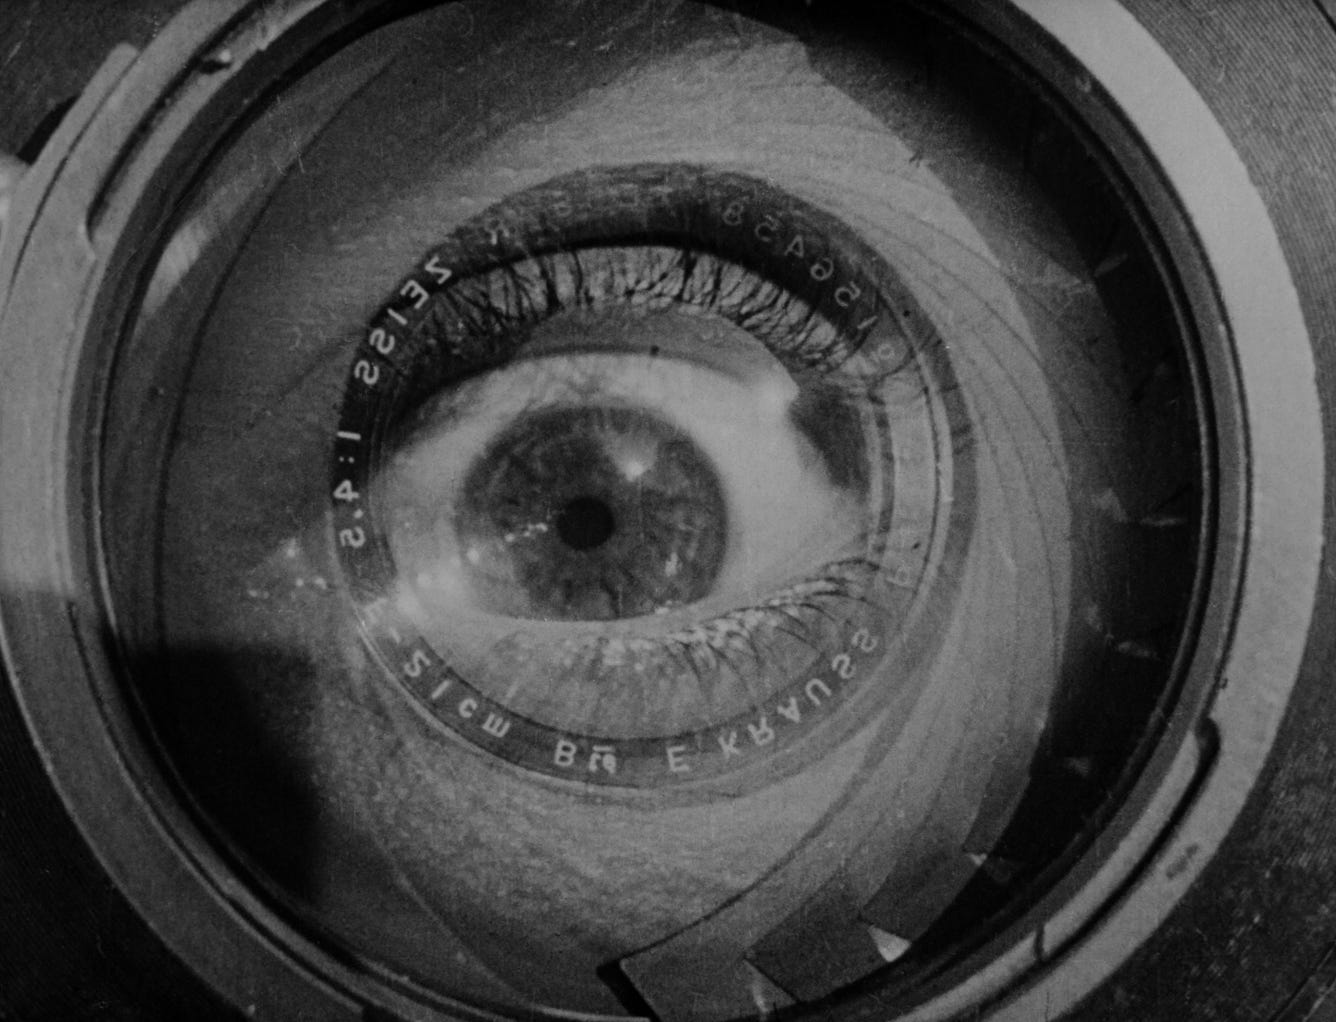 DZIGA VERTOV: THE MAN WITH THE MOVIE CAMERA AND OTHER NEWLY-RESTORED WORKS